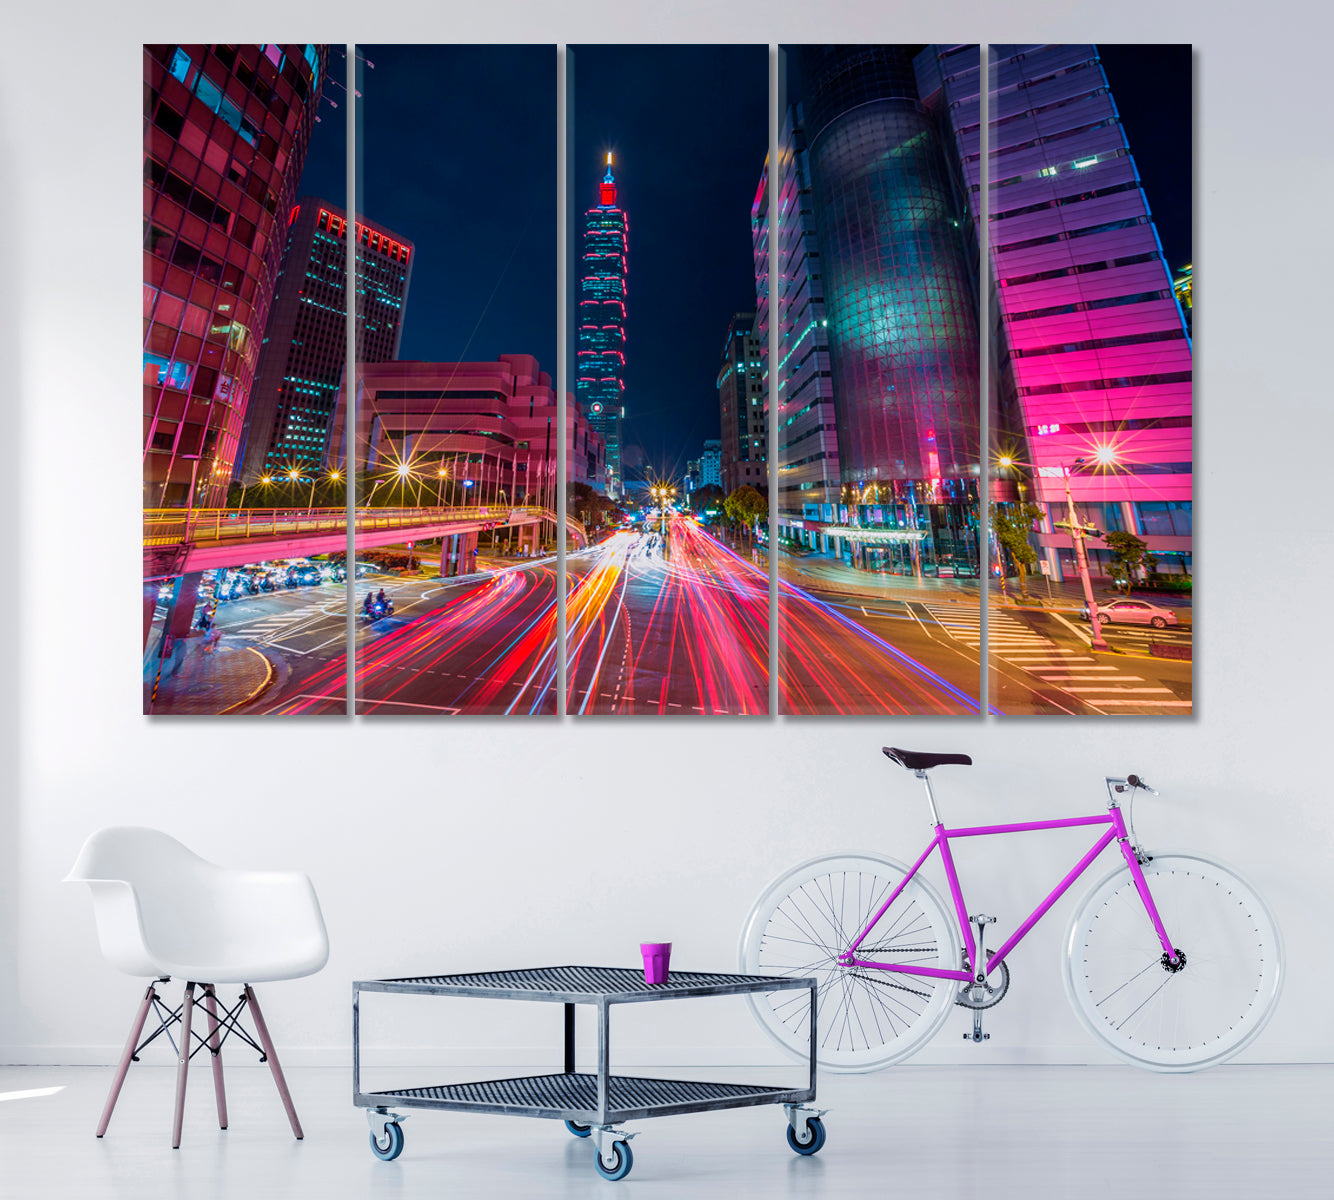 Taipei Cityscape at Night Taiwan Canvas Print ArtLexy 5 Panels 36"x24" inches 